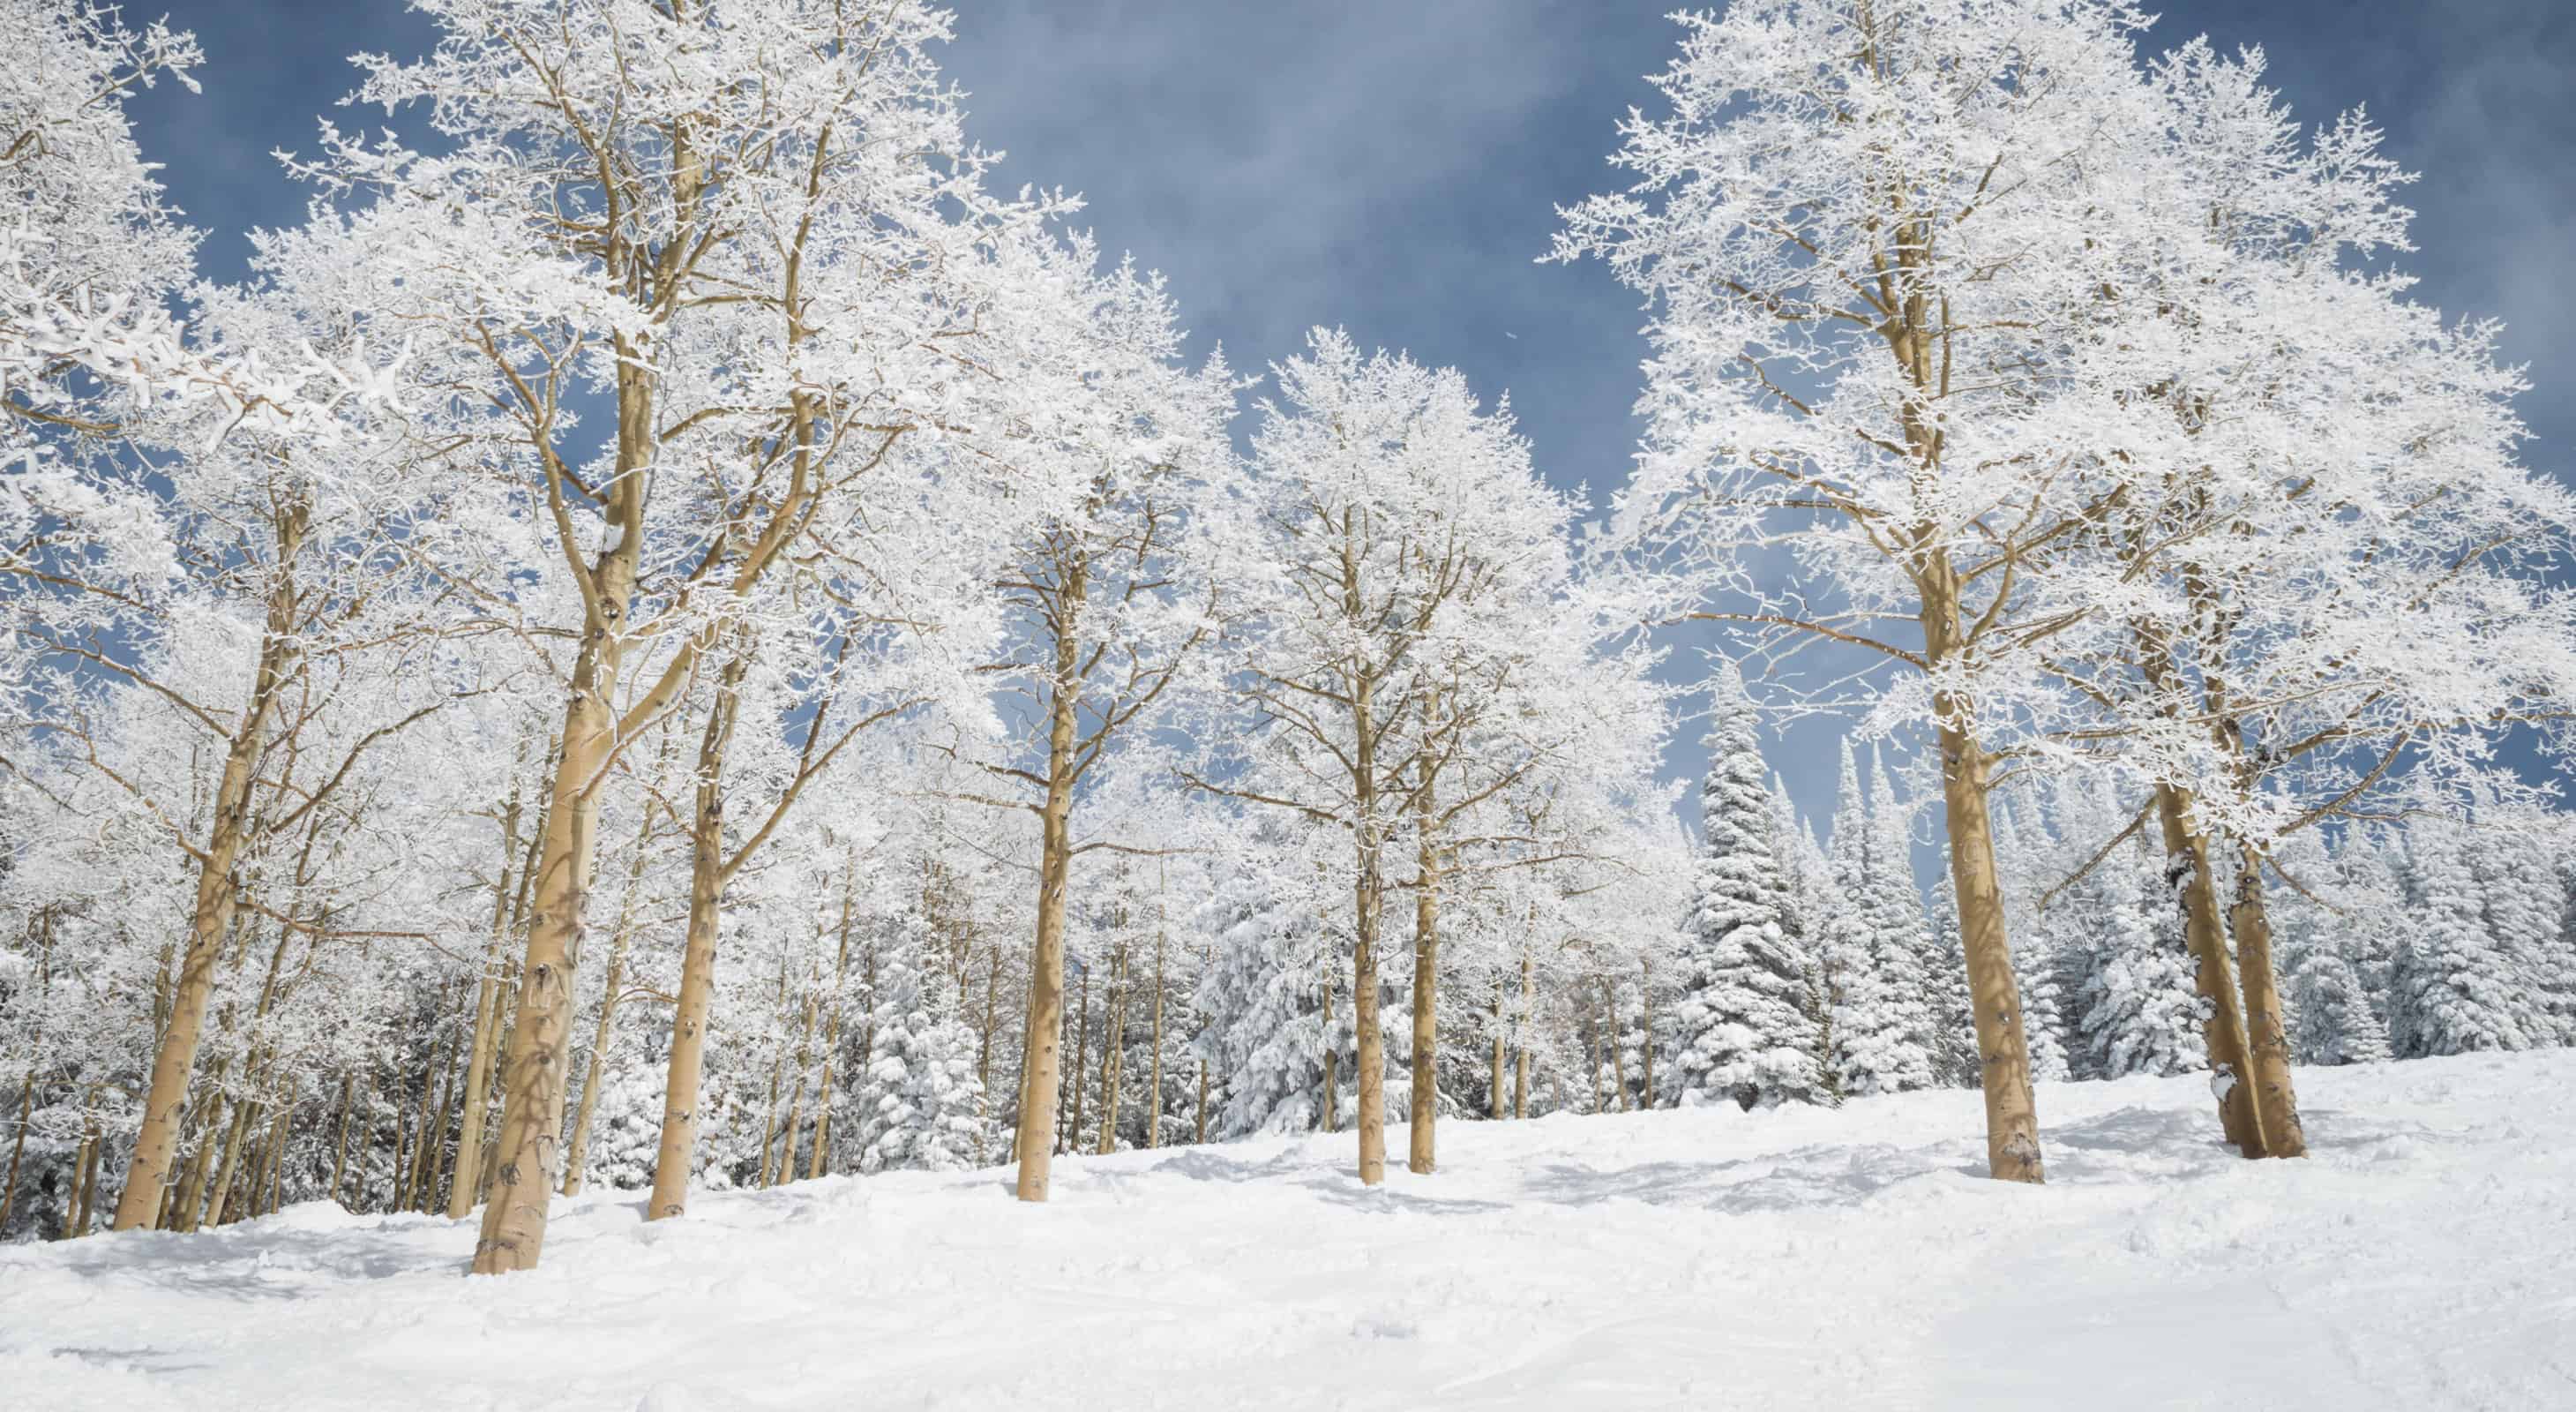 Aspen trees in the winter covered in snow